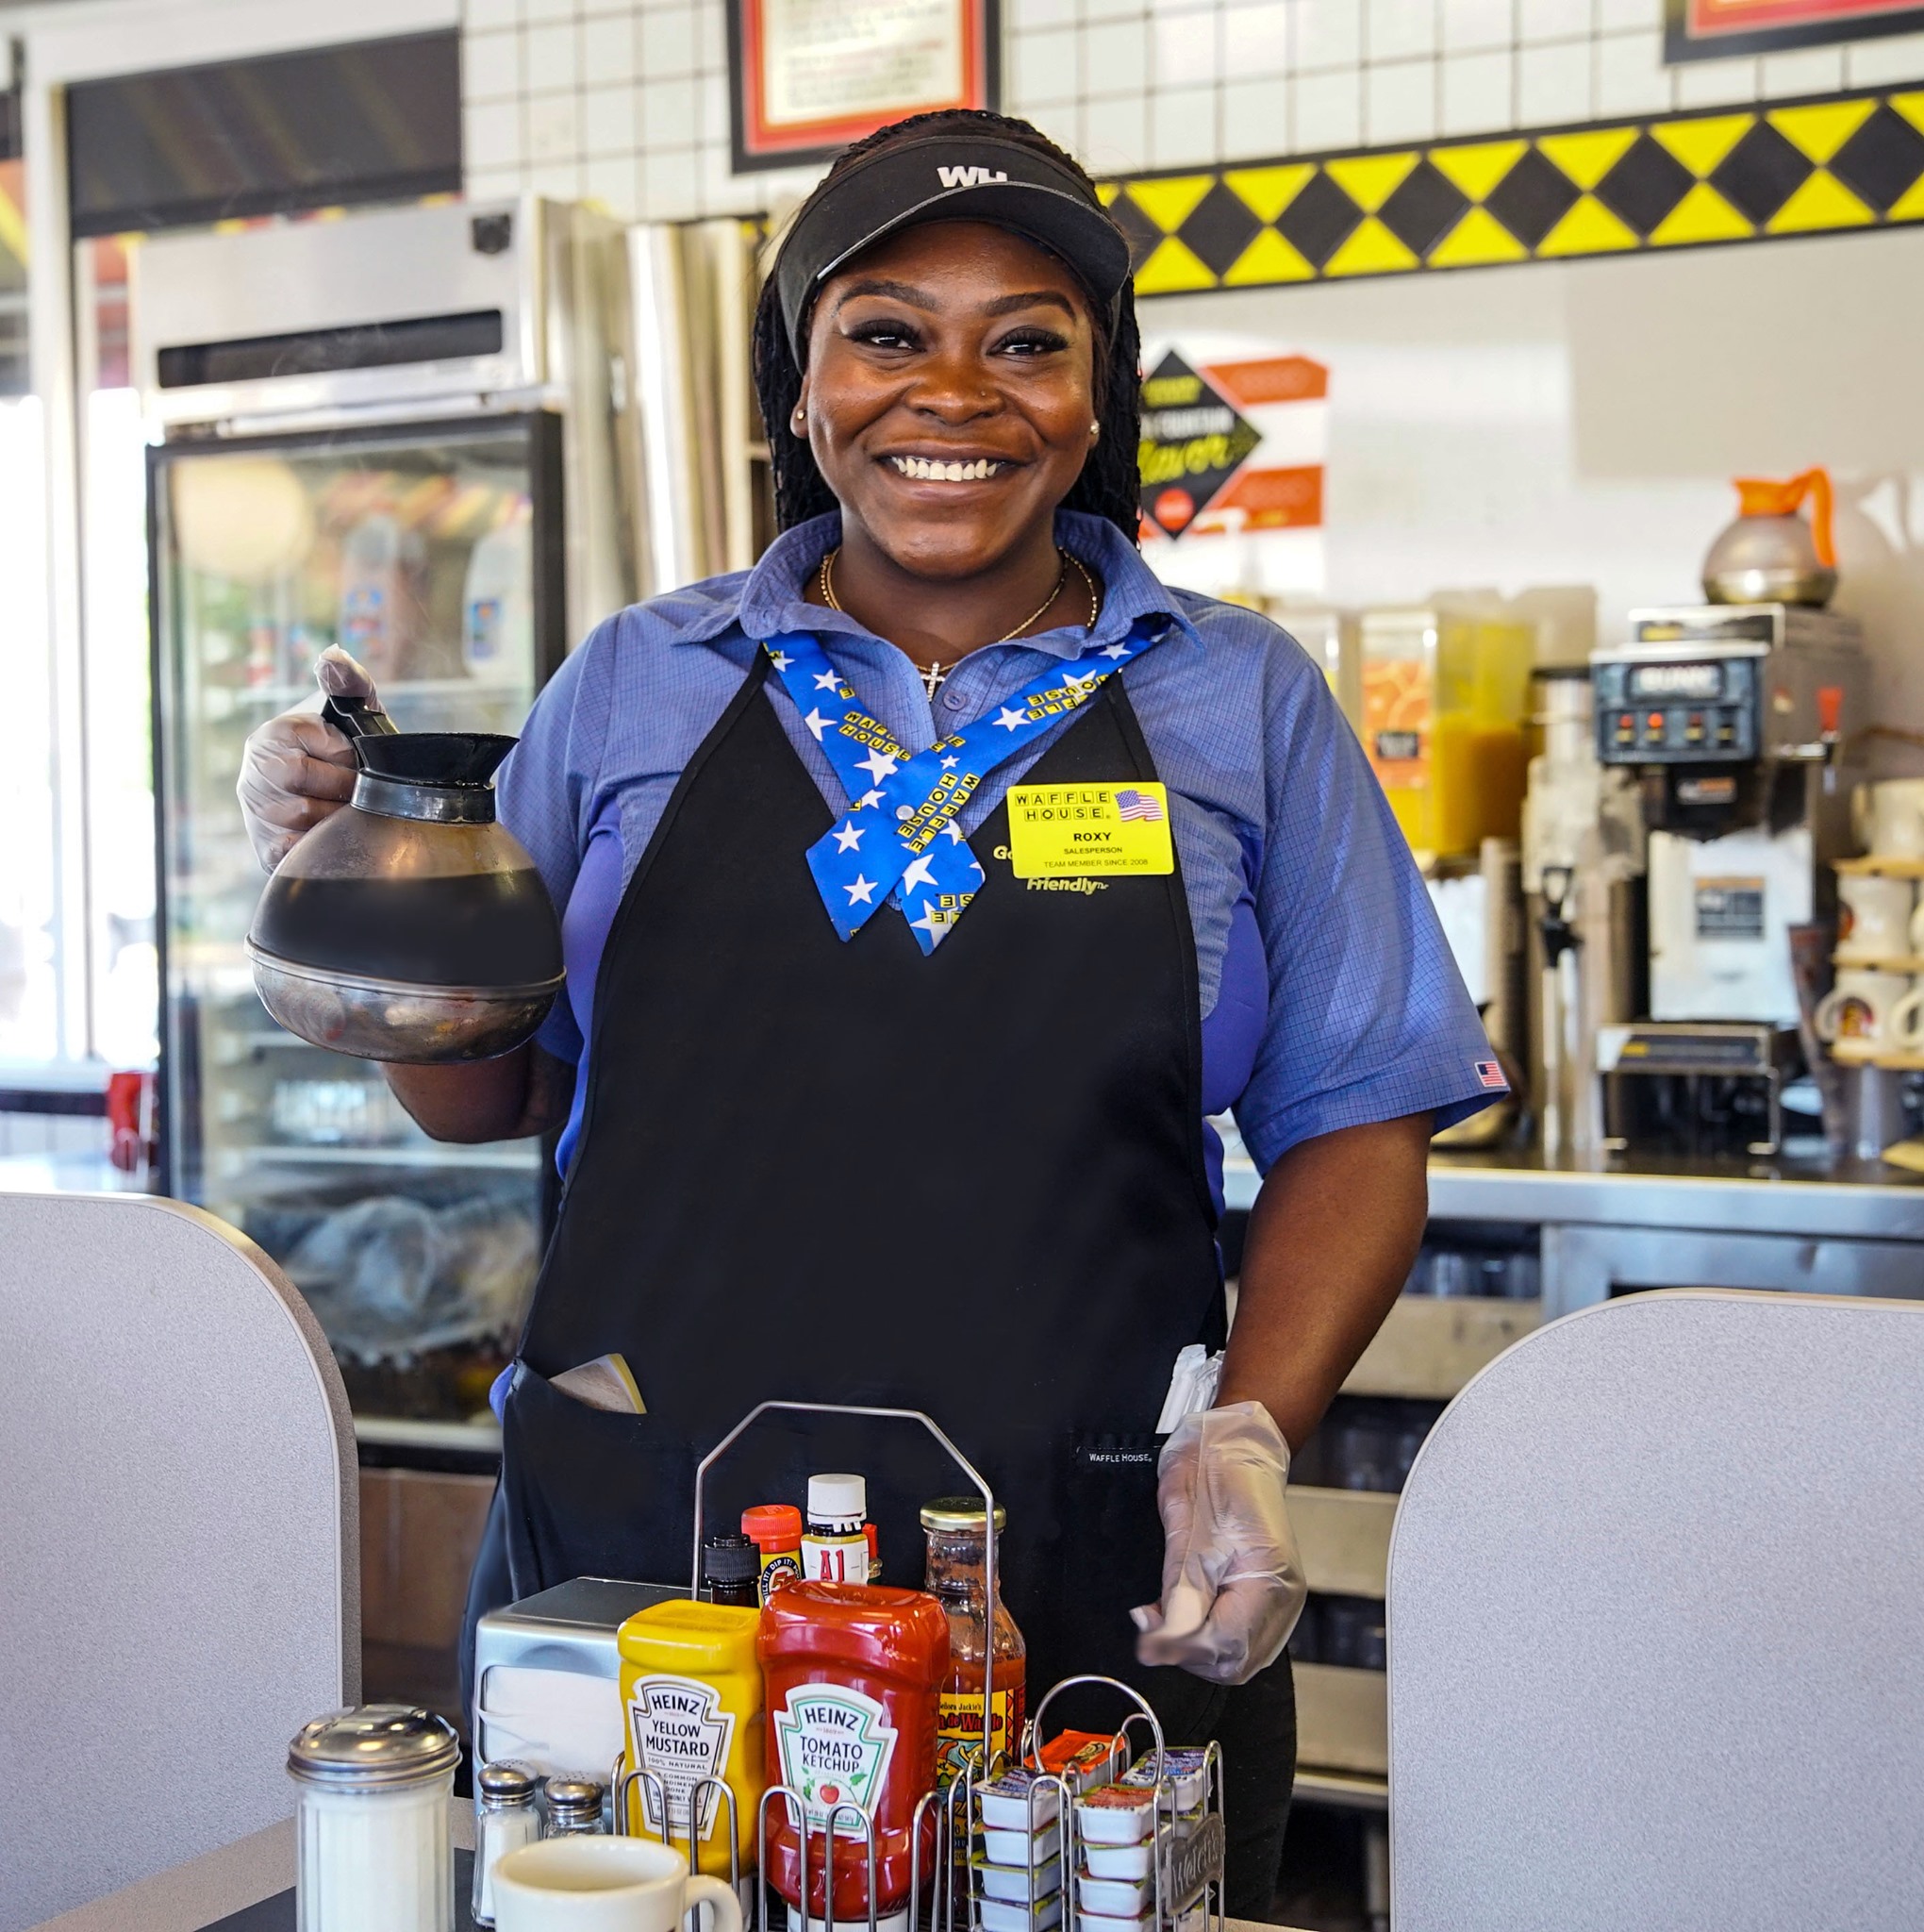 Waffle House has kept its same look since opening in 1955 to bring a nostalgic breakfast feel.